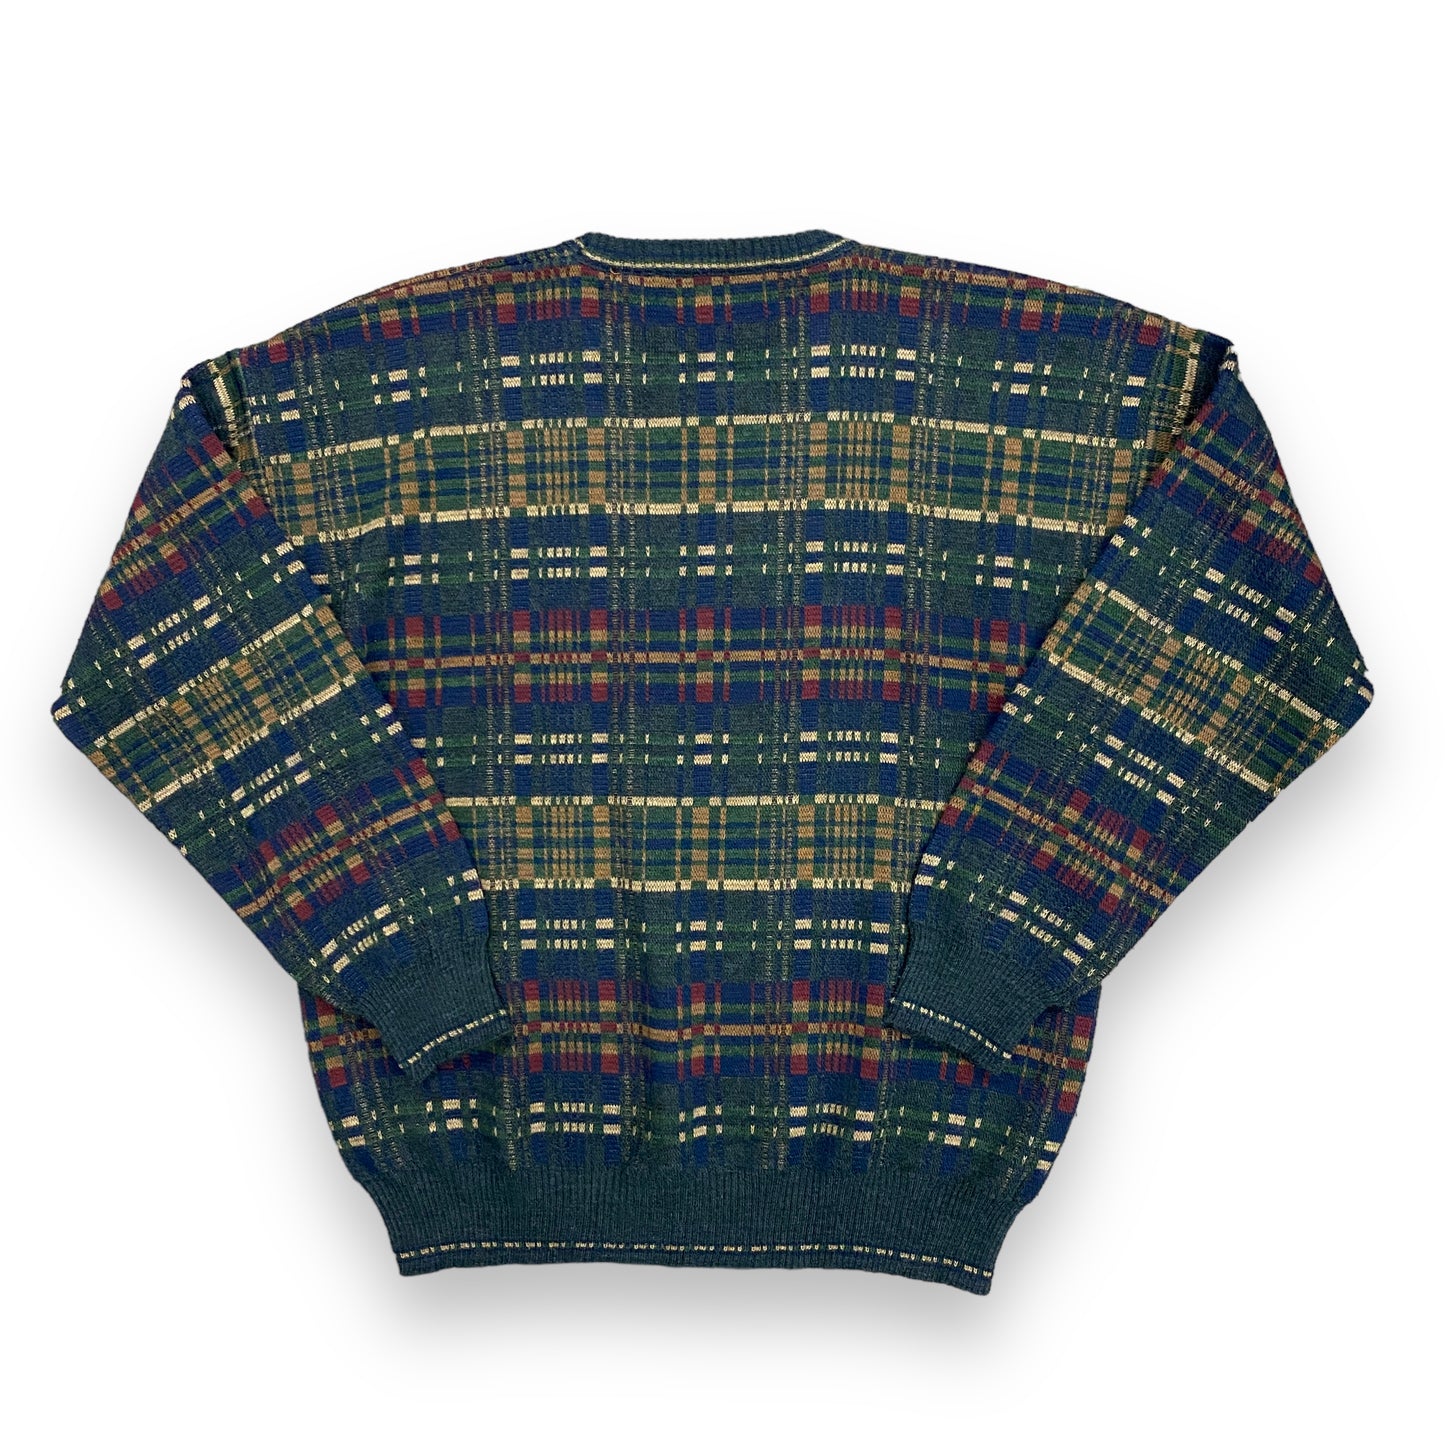 John Ashford Plaid Wool Sweater Made in Italy - Size Large